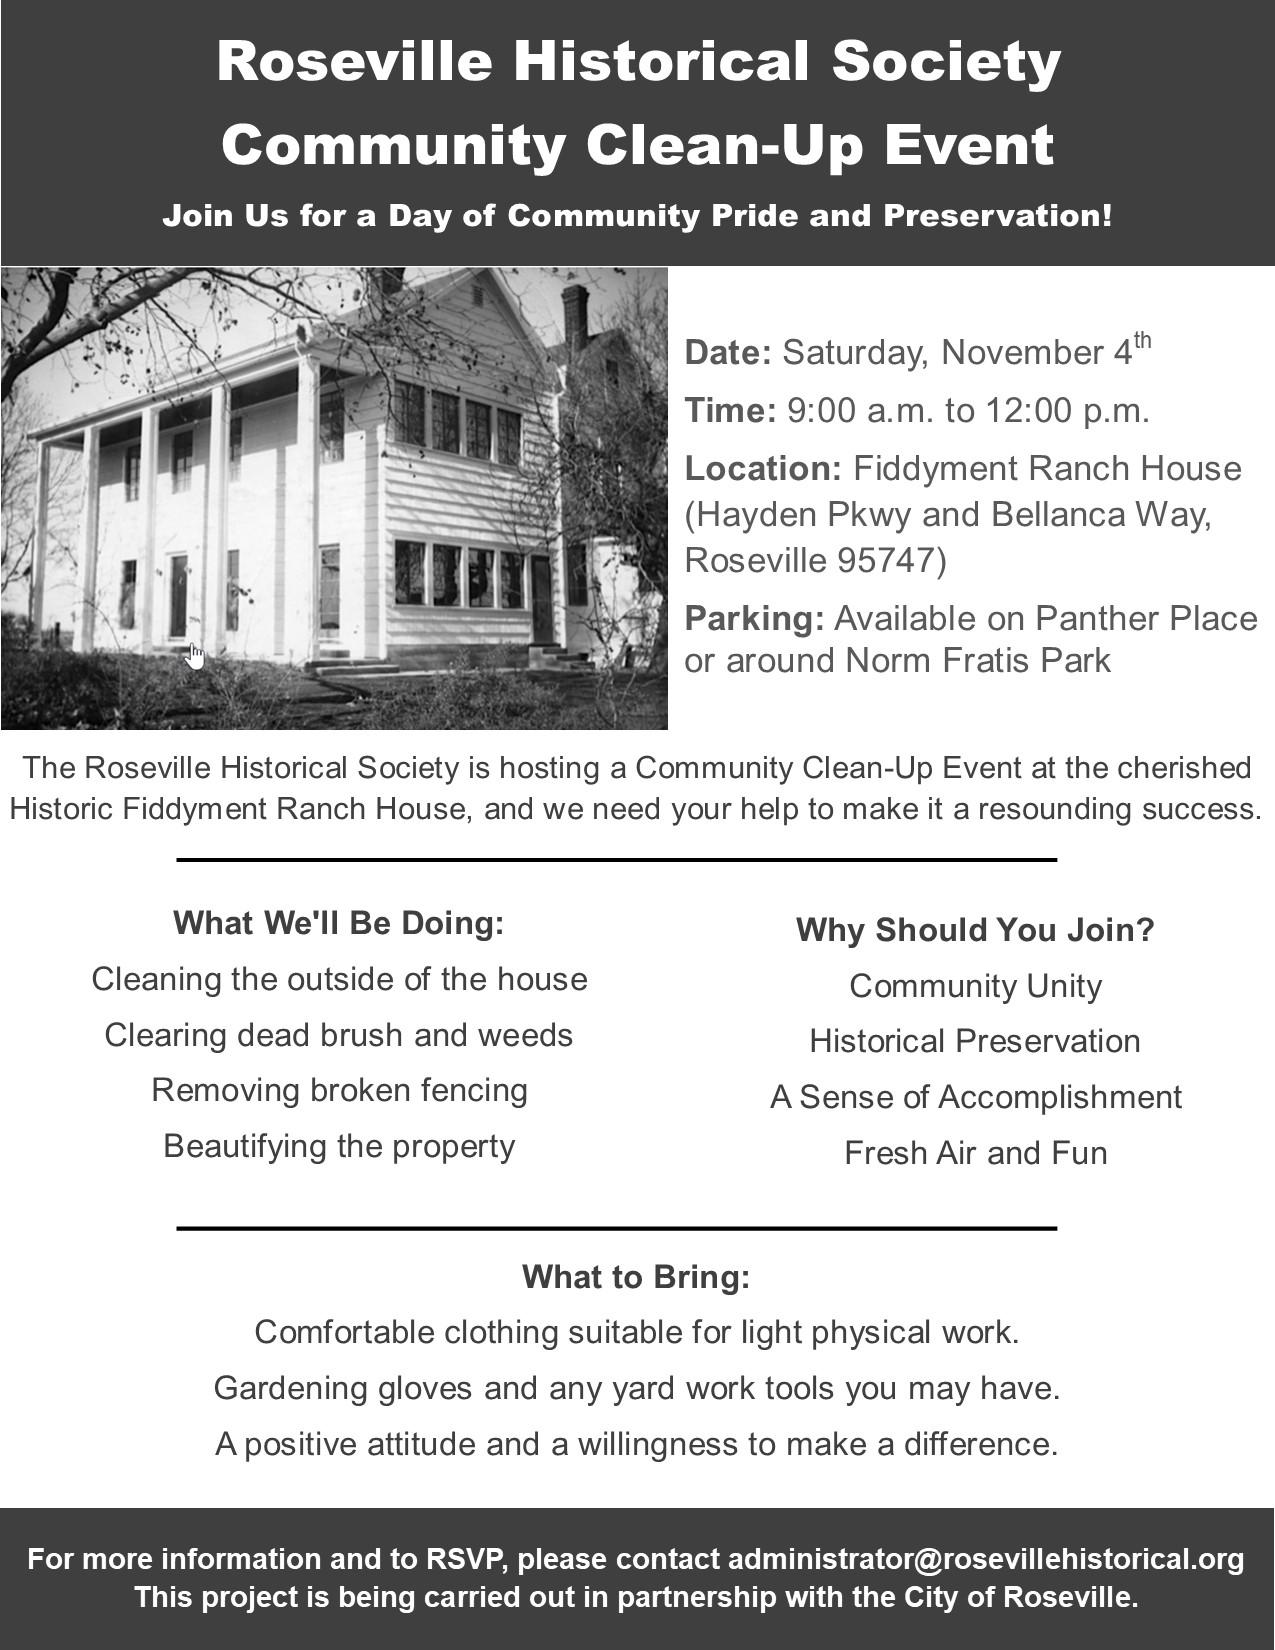 More information about "Roseville Historical Society Community Clean-Up Event"